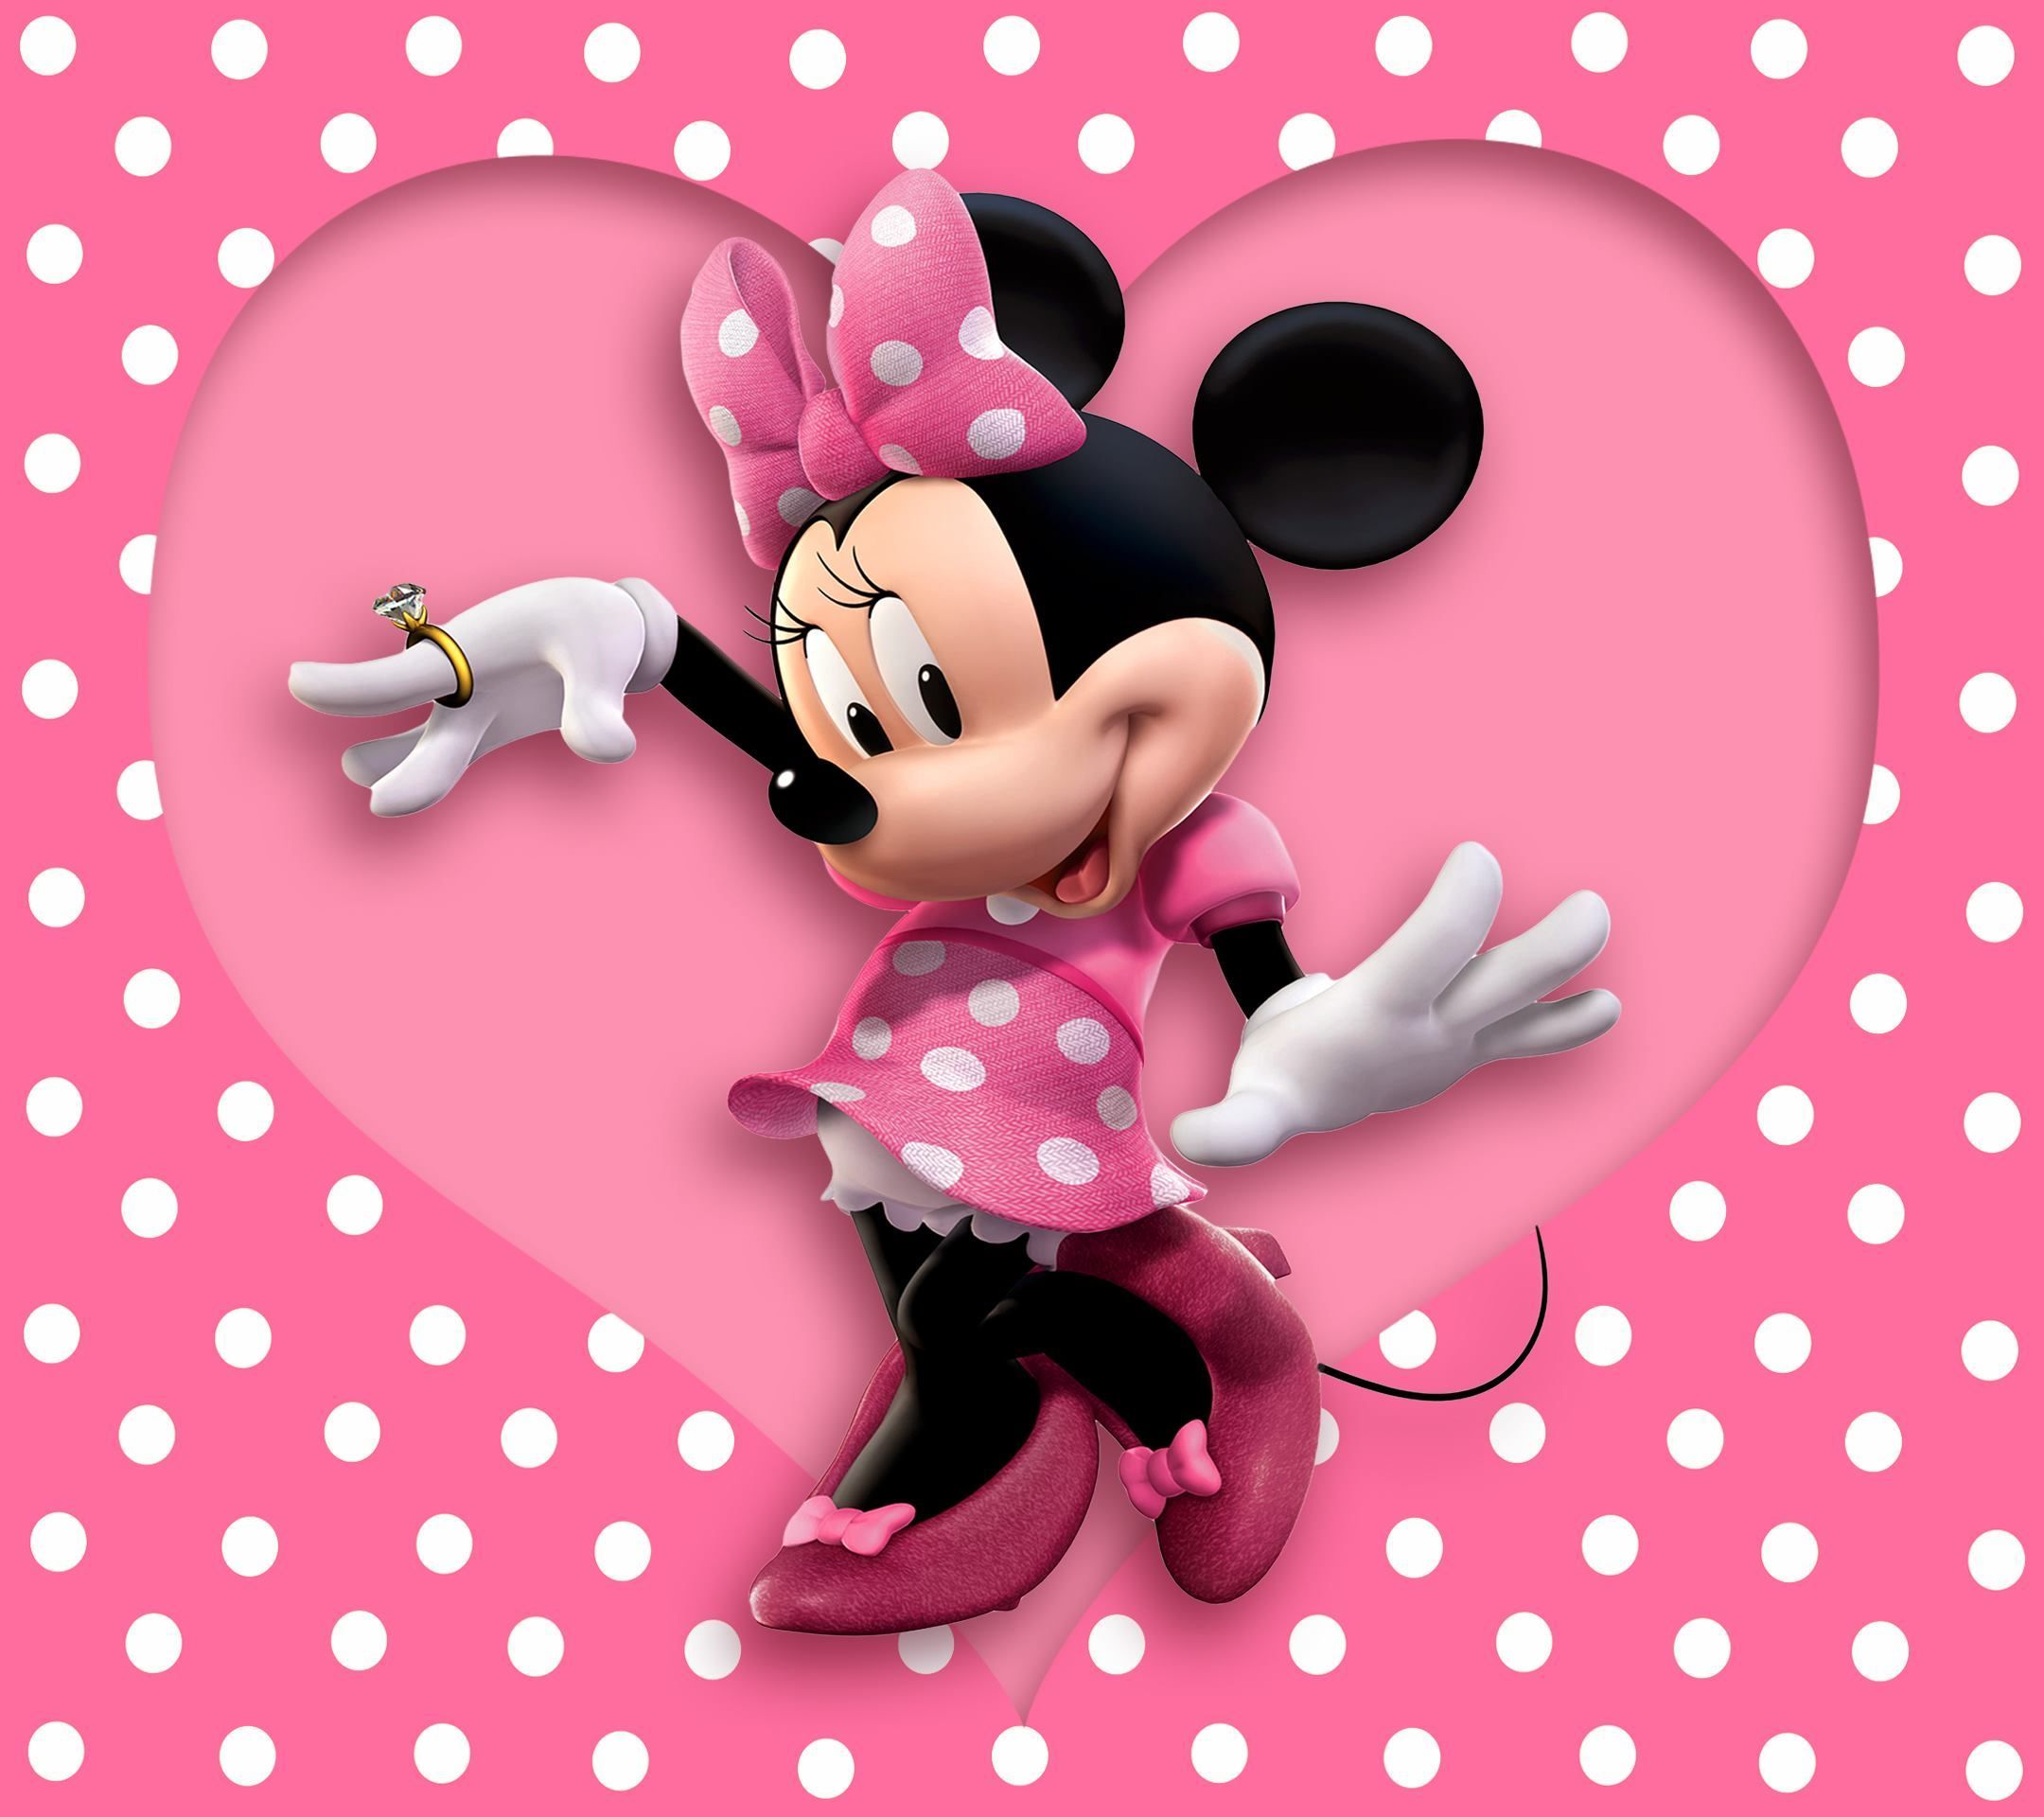 Cute Mickey Mouse IPhone Wallpaper 71 images